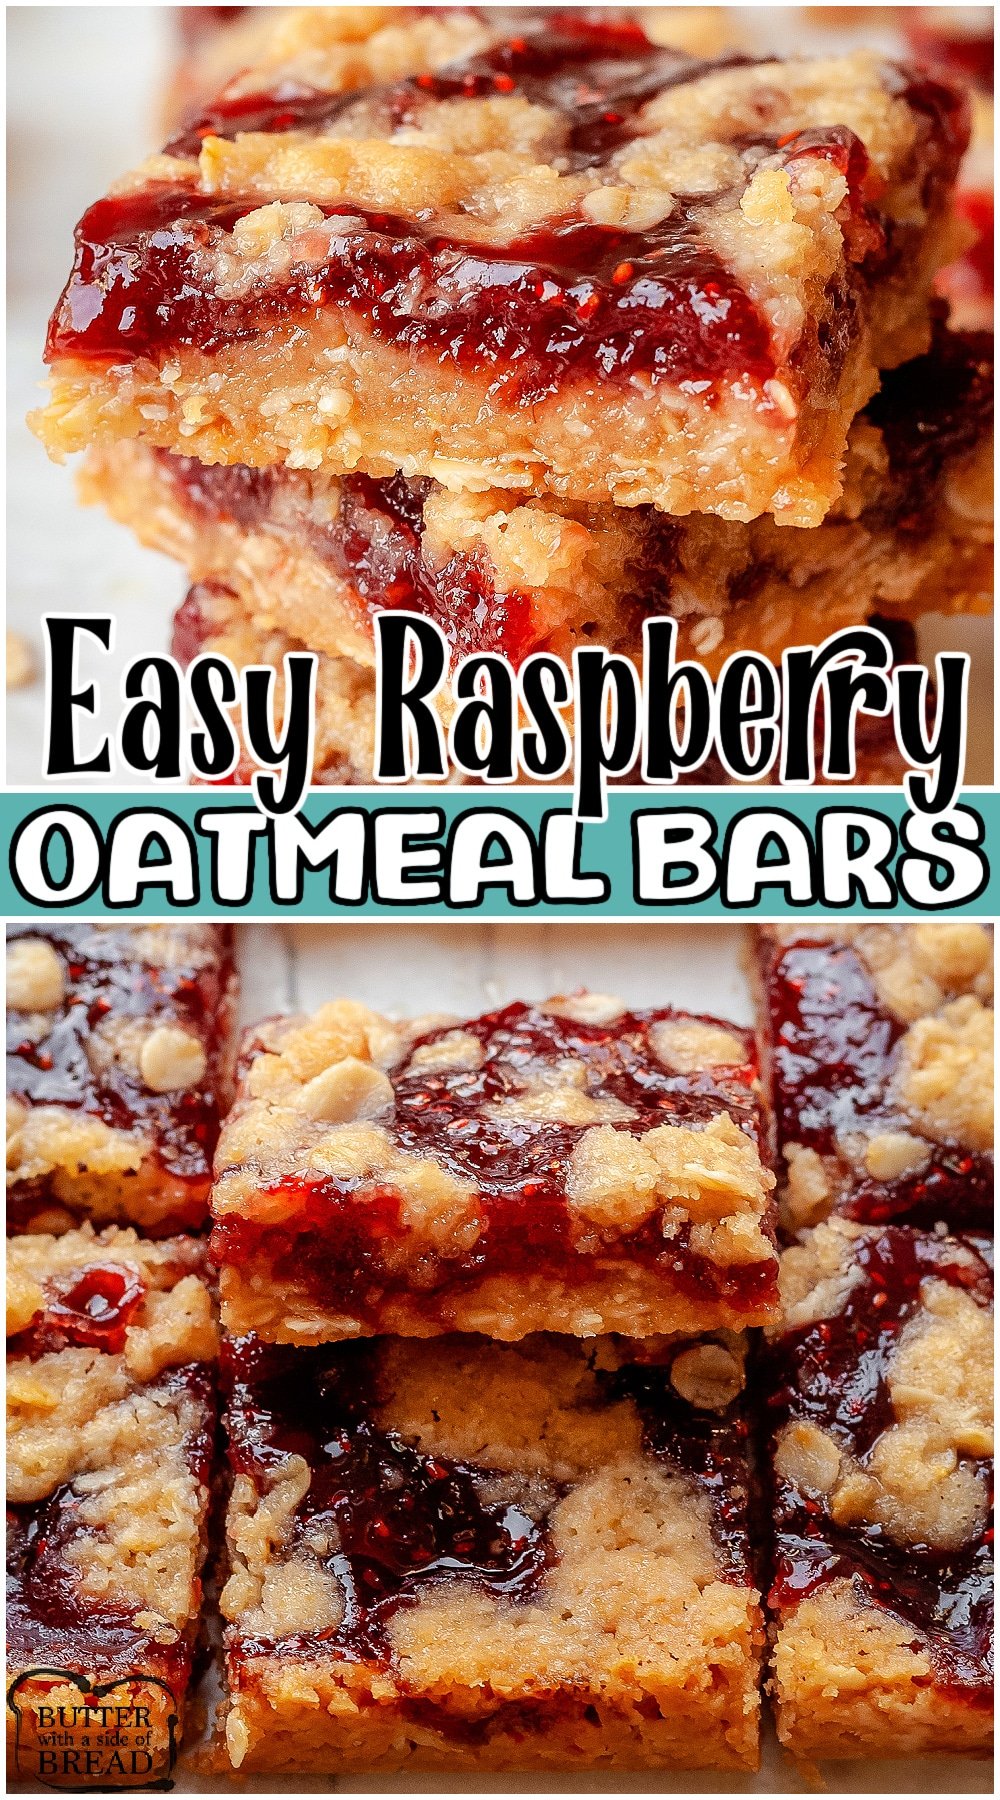 Raspberry Oatmeal Bars made with oats, brown sugar, coconut oil and raspberry jam! Easy oat bar recipe with fantastic sweet raspberry flavor!